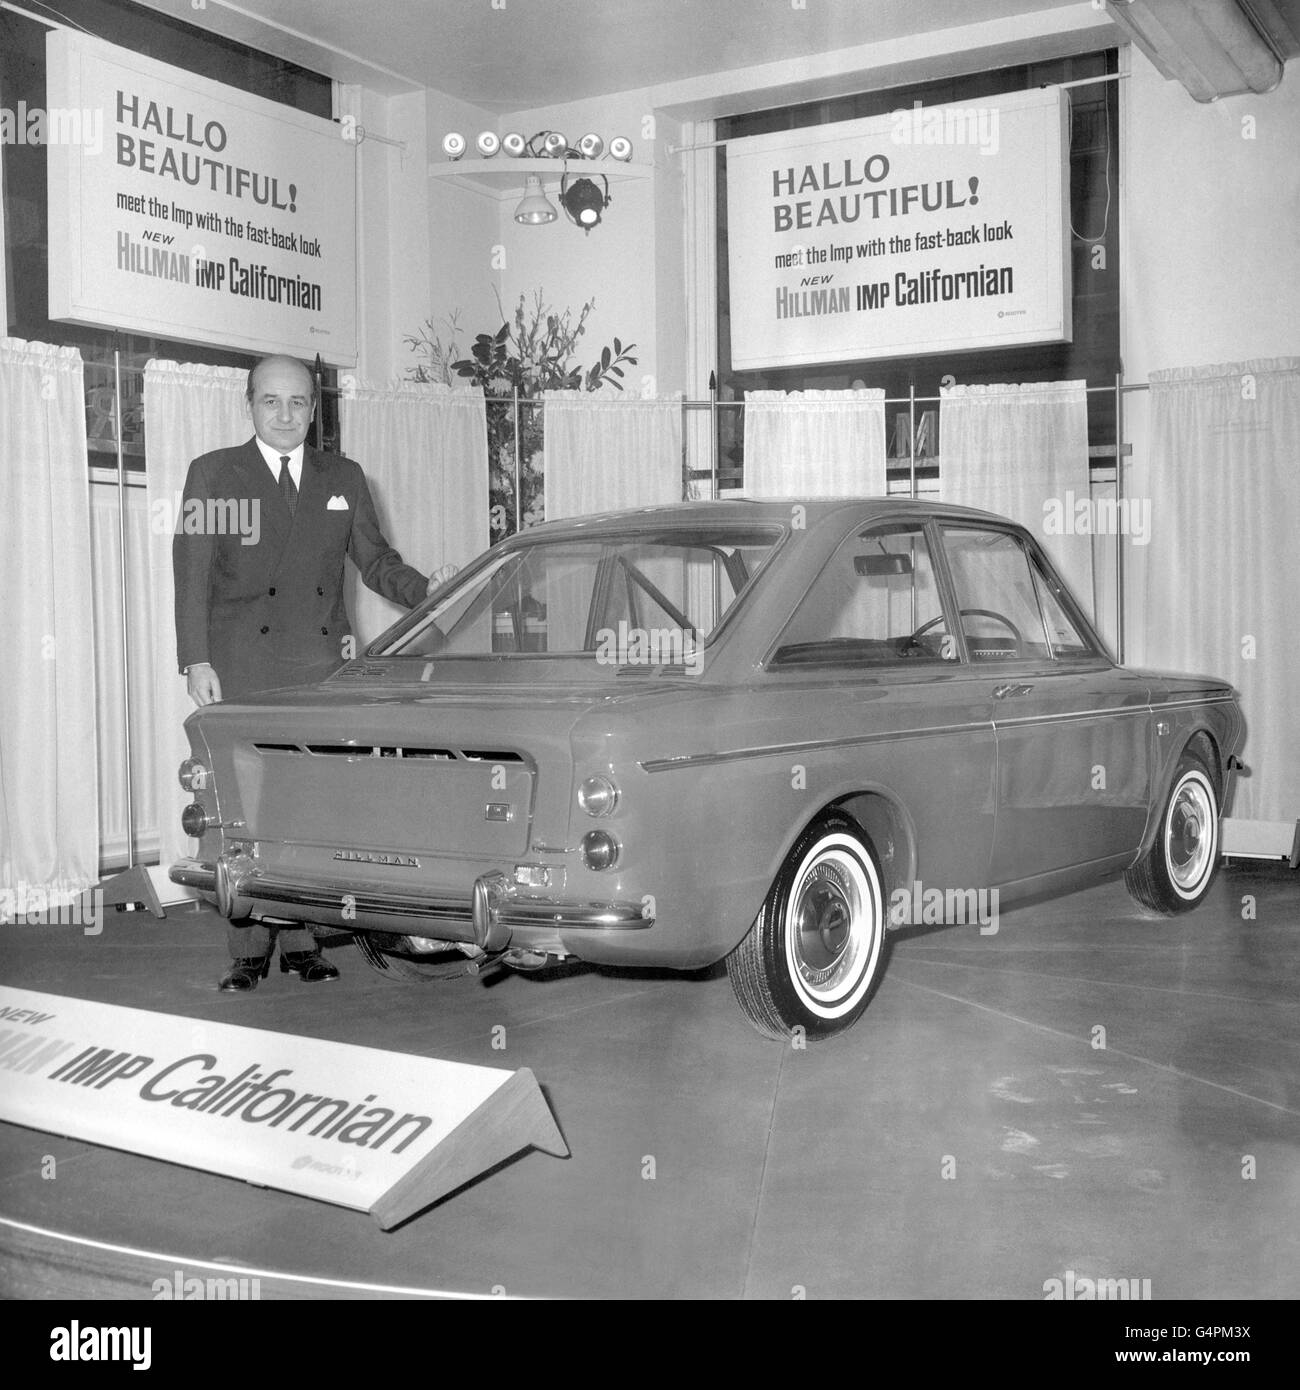 Lord Rootes, Deputy Chairman and Managing Director of Rootes Motors Ltd, is shown in London with the new Hillman Imp Californian, which is in production at the Roote Group's plants at Linwood, Renfrewshire. Stock Photo